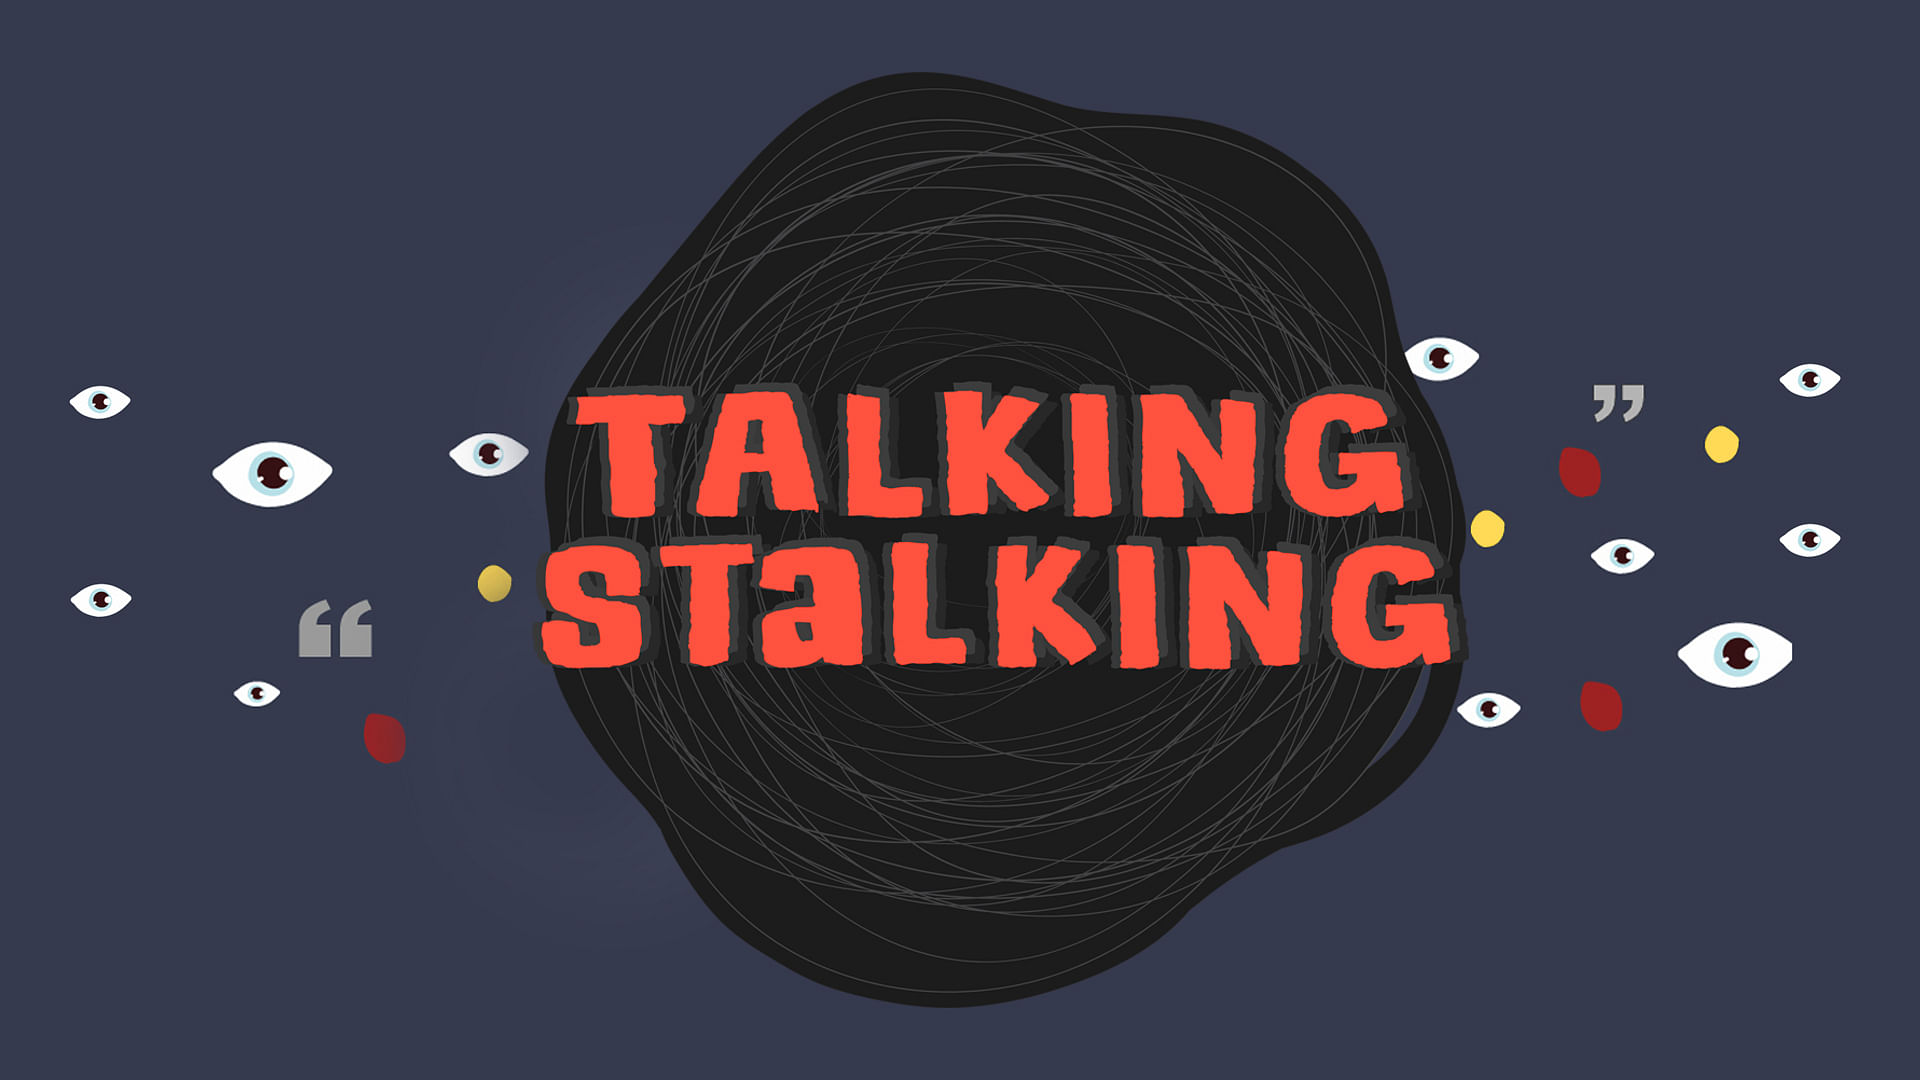 Make stalking a non-bailable offence. Joint The Quint campaign.&nbsp;